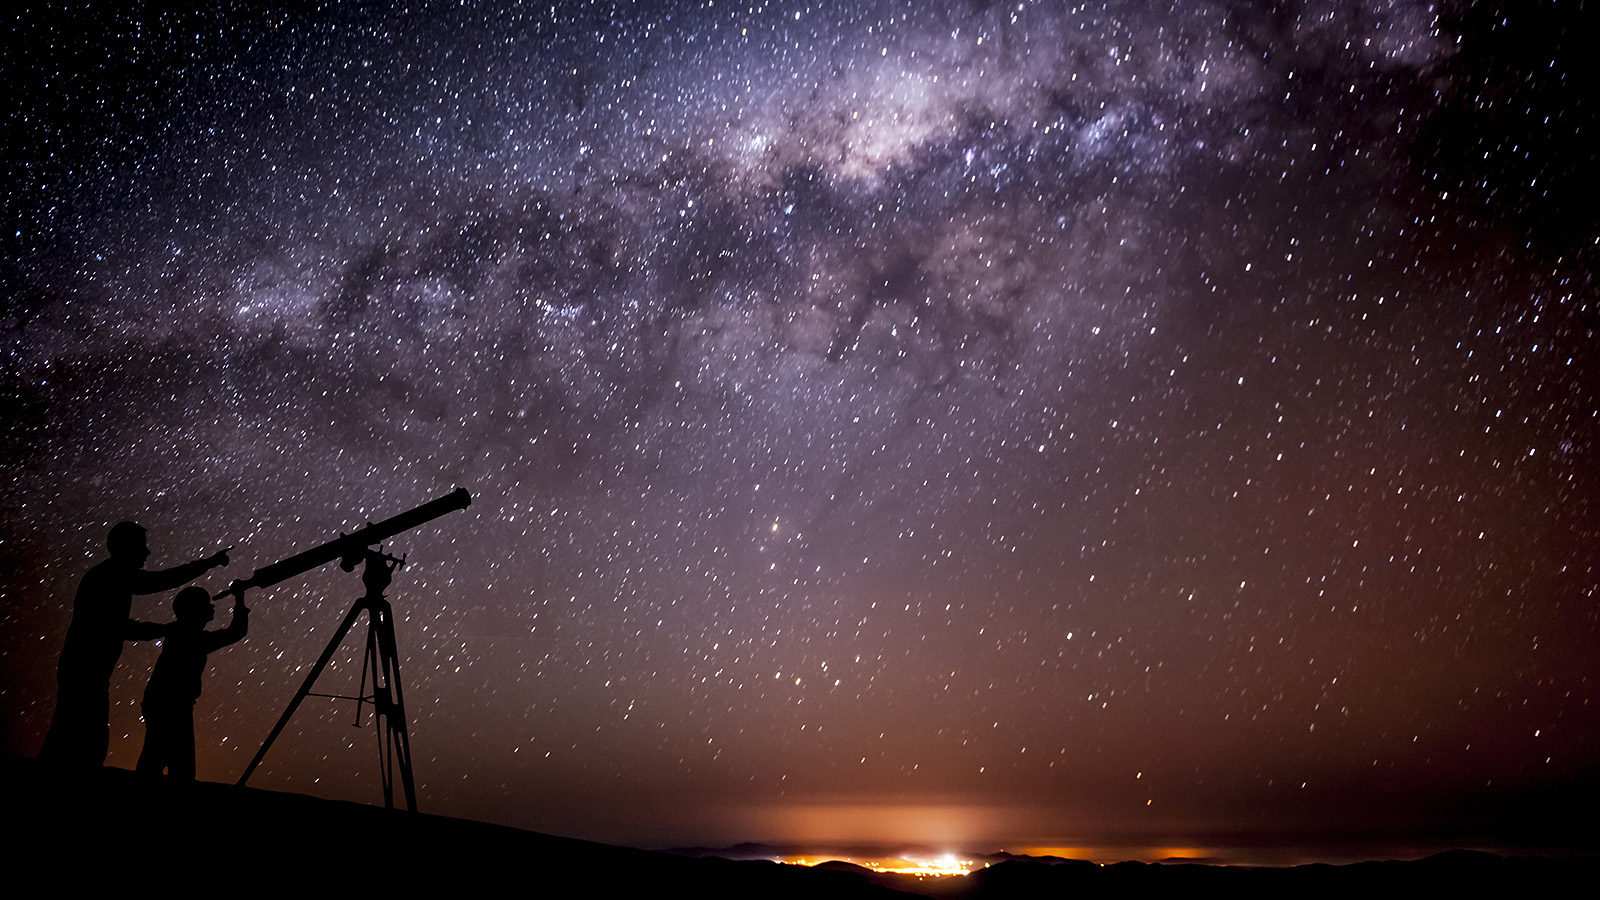 🔭 Are You Intelligent Enough to Pass This Challenging Science Quiz? Let’s Find Out Milky Way Galaxy